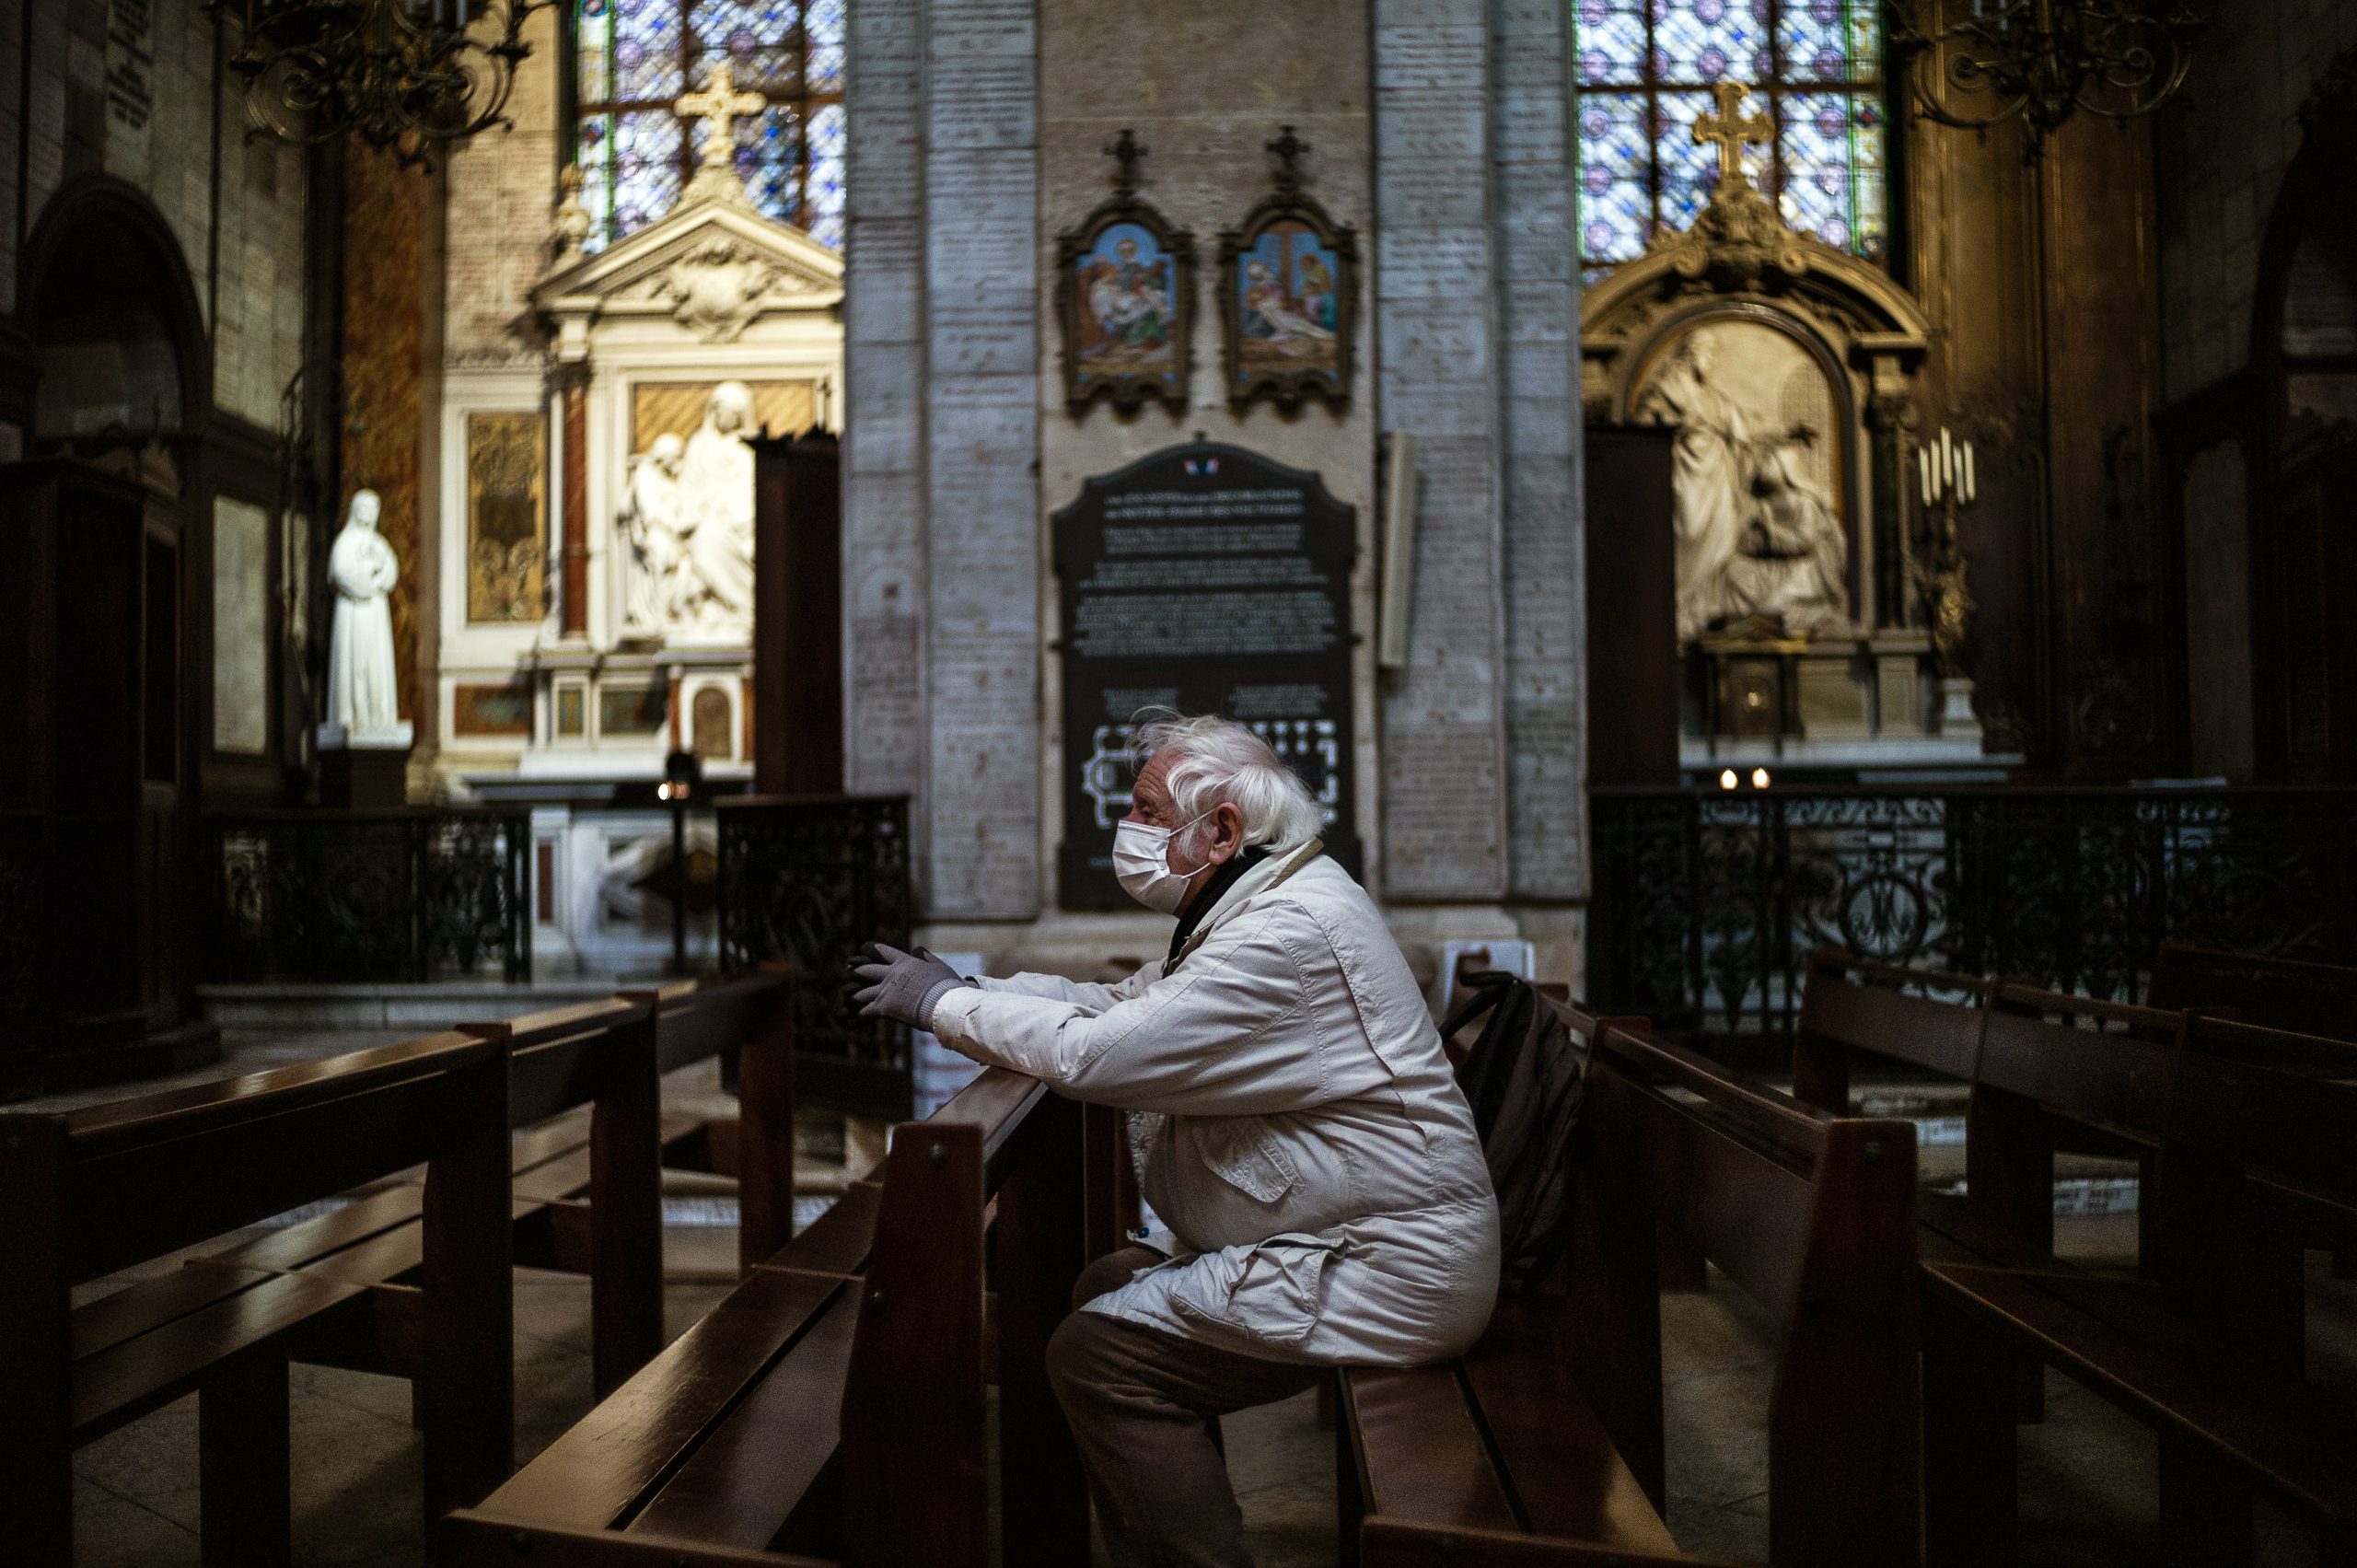 epa08325054 A man wearing a protective face mask prays inside Notre Dame des Victoires basilica in Paris, France, 26 March 2020. France is under lockdown in an attempt to stop the widespread of the SARS-CoV-2 coronavirus causing the Covid-19 disease.  EPA/YOAN VALAT